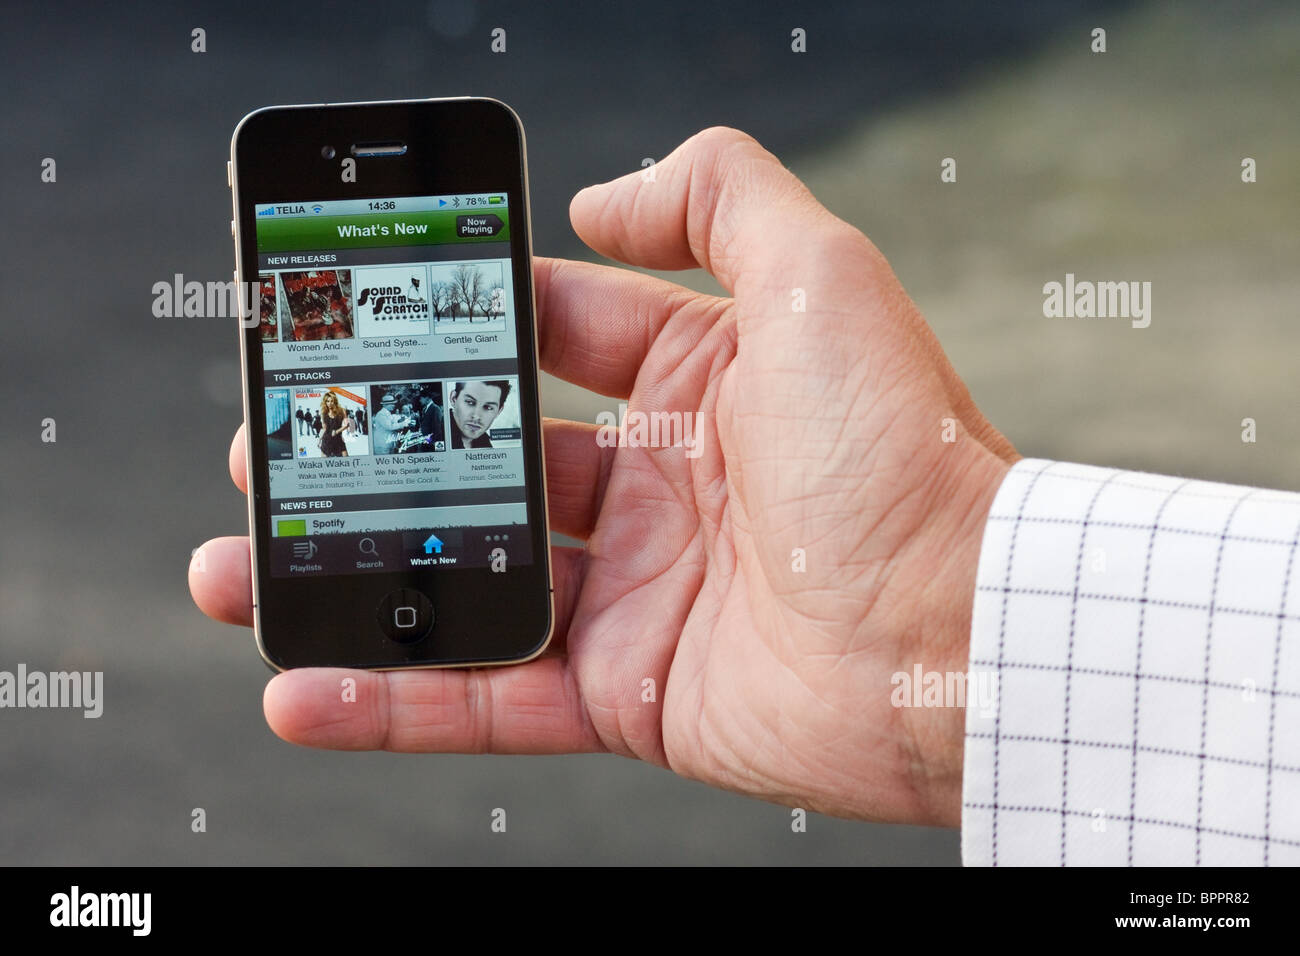 The iPhone 4 in the palm of the hand of a man. On the screen you can see the Spotify app. Stock Photo